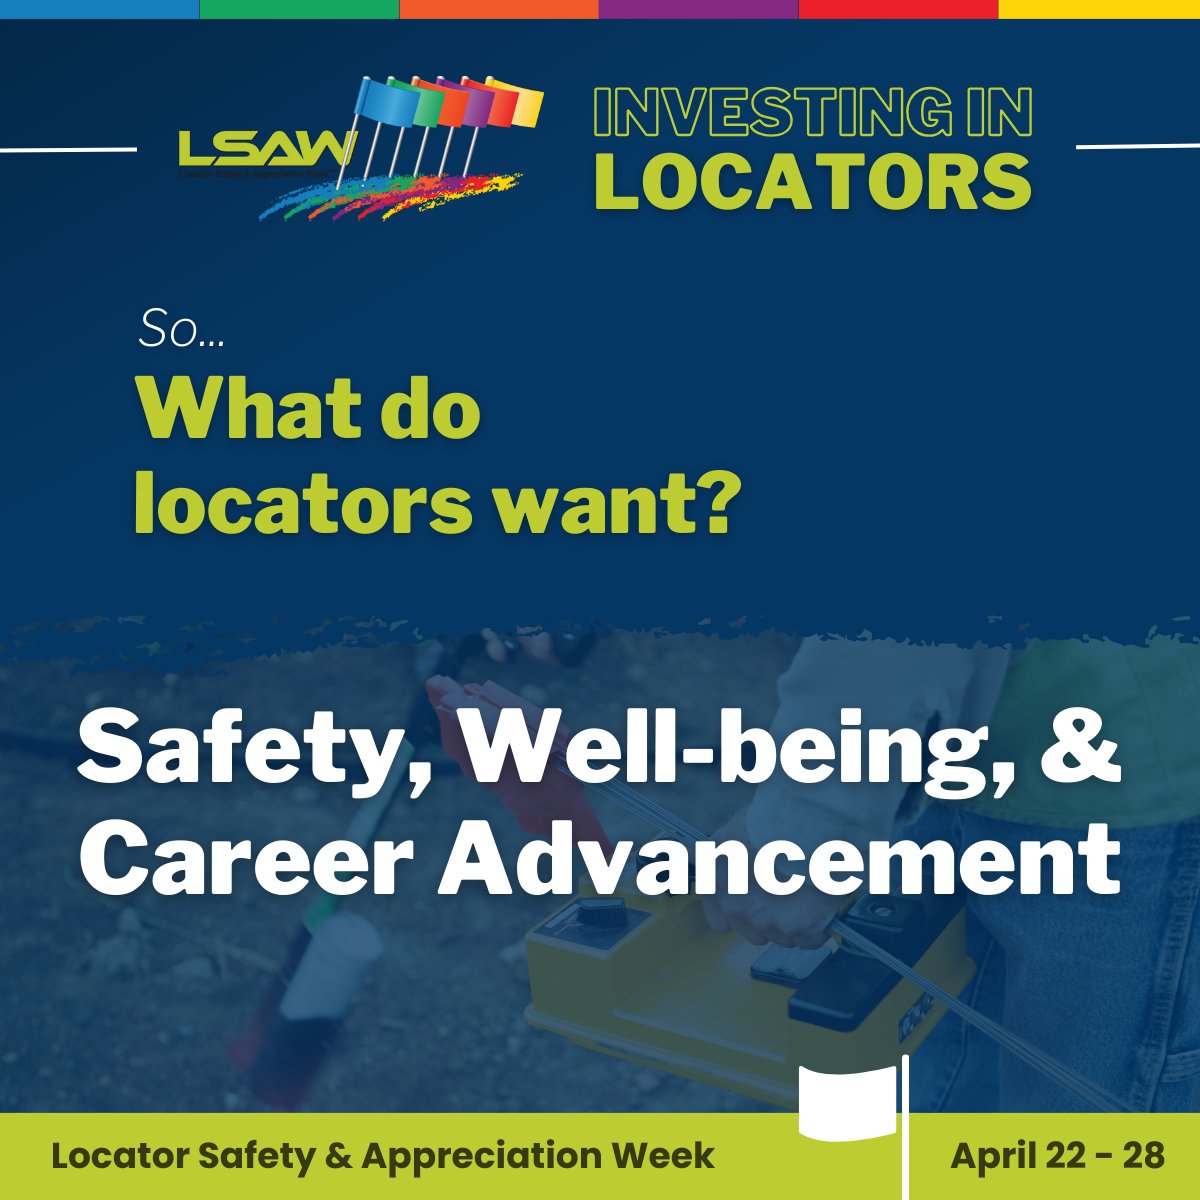 🌟 Celebrating Locator Safety & Appreciation Week! 🌟

#UtilityLocators are crucial for #DamagePrevention & #ExcavationSafety. Let's amplify their voices & recognize their invaluable contributions. 

#Call811 #LSAW #NSDM #NationalSafeDiggingMonth #UtilityLocating